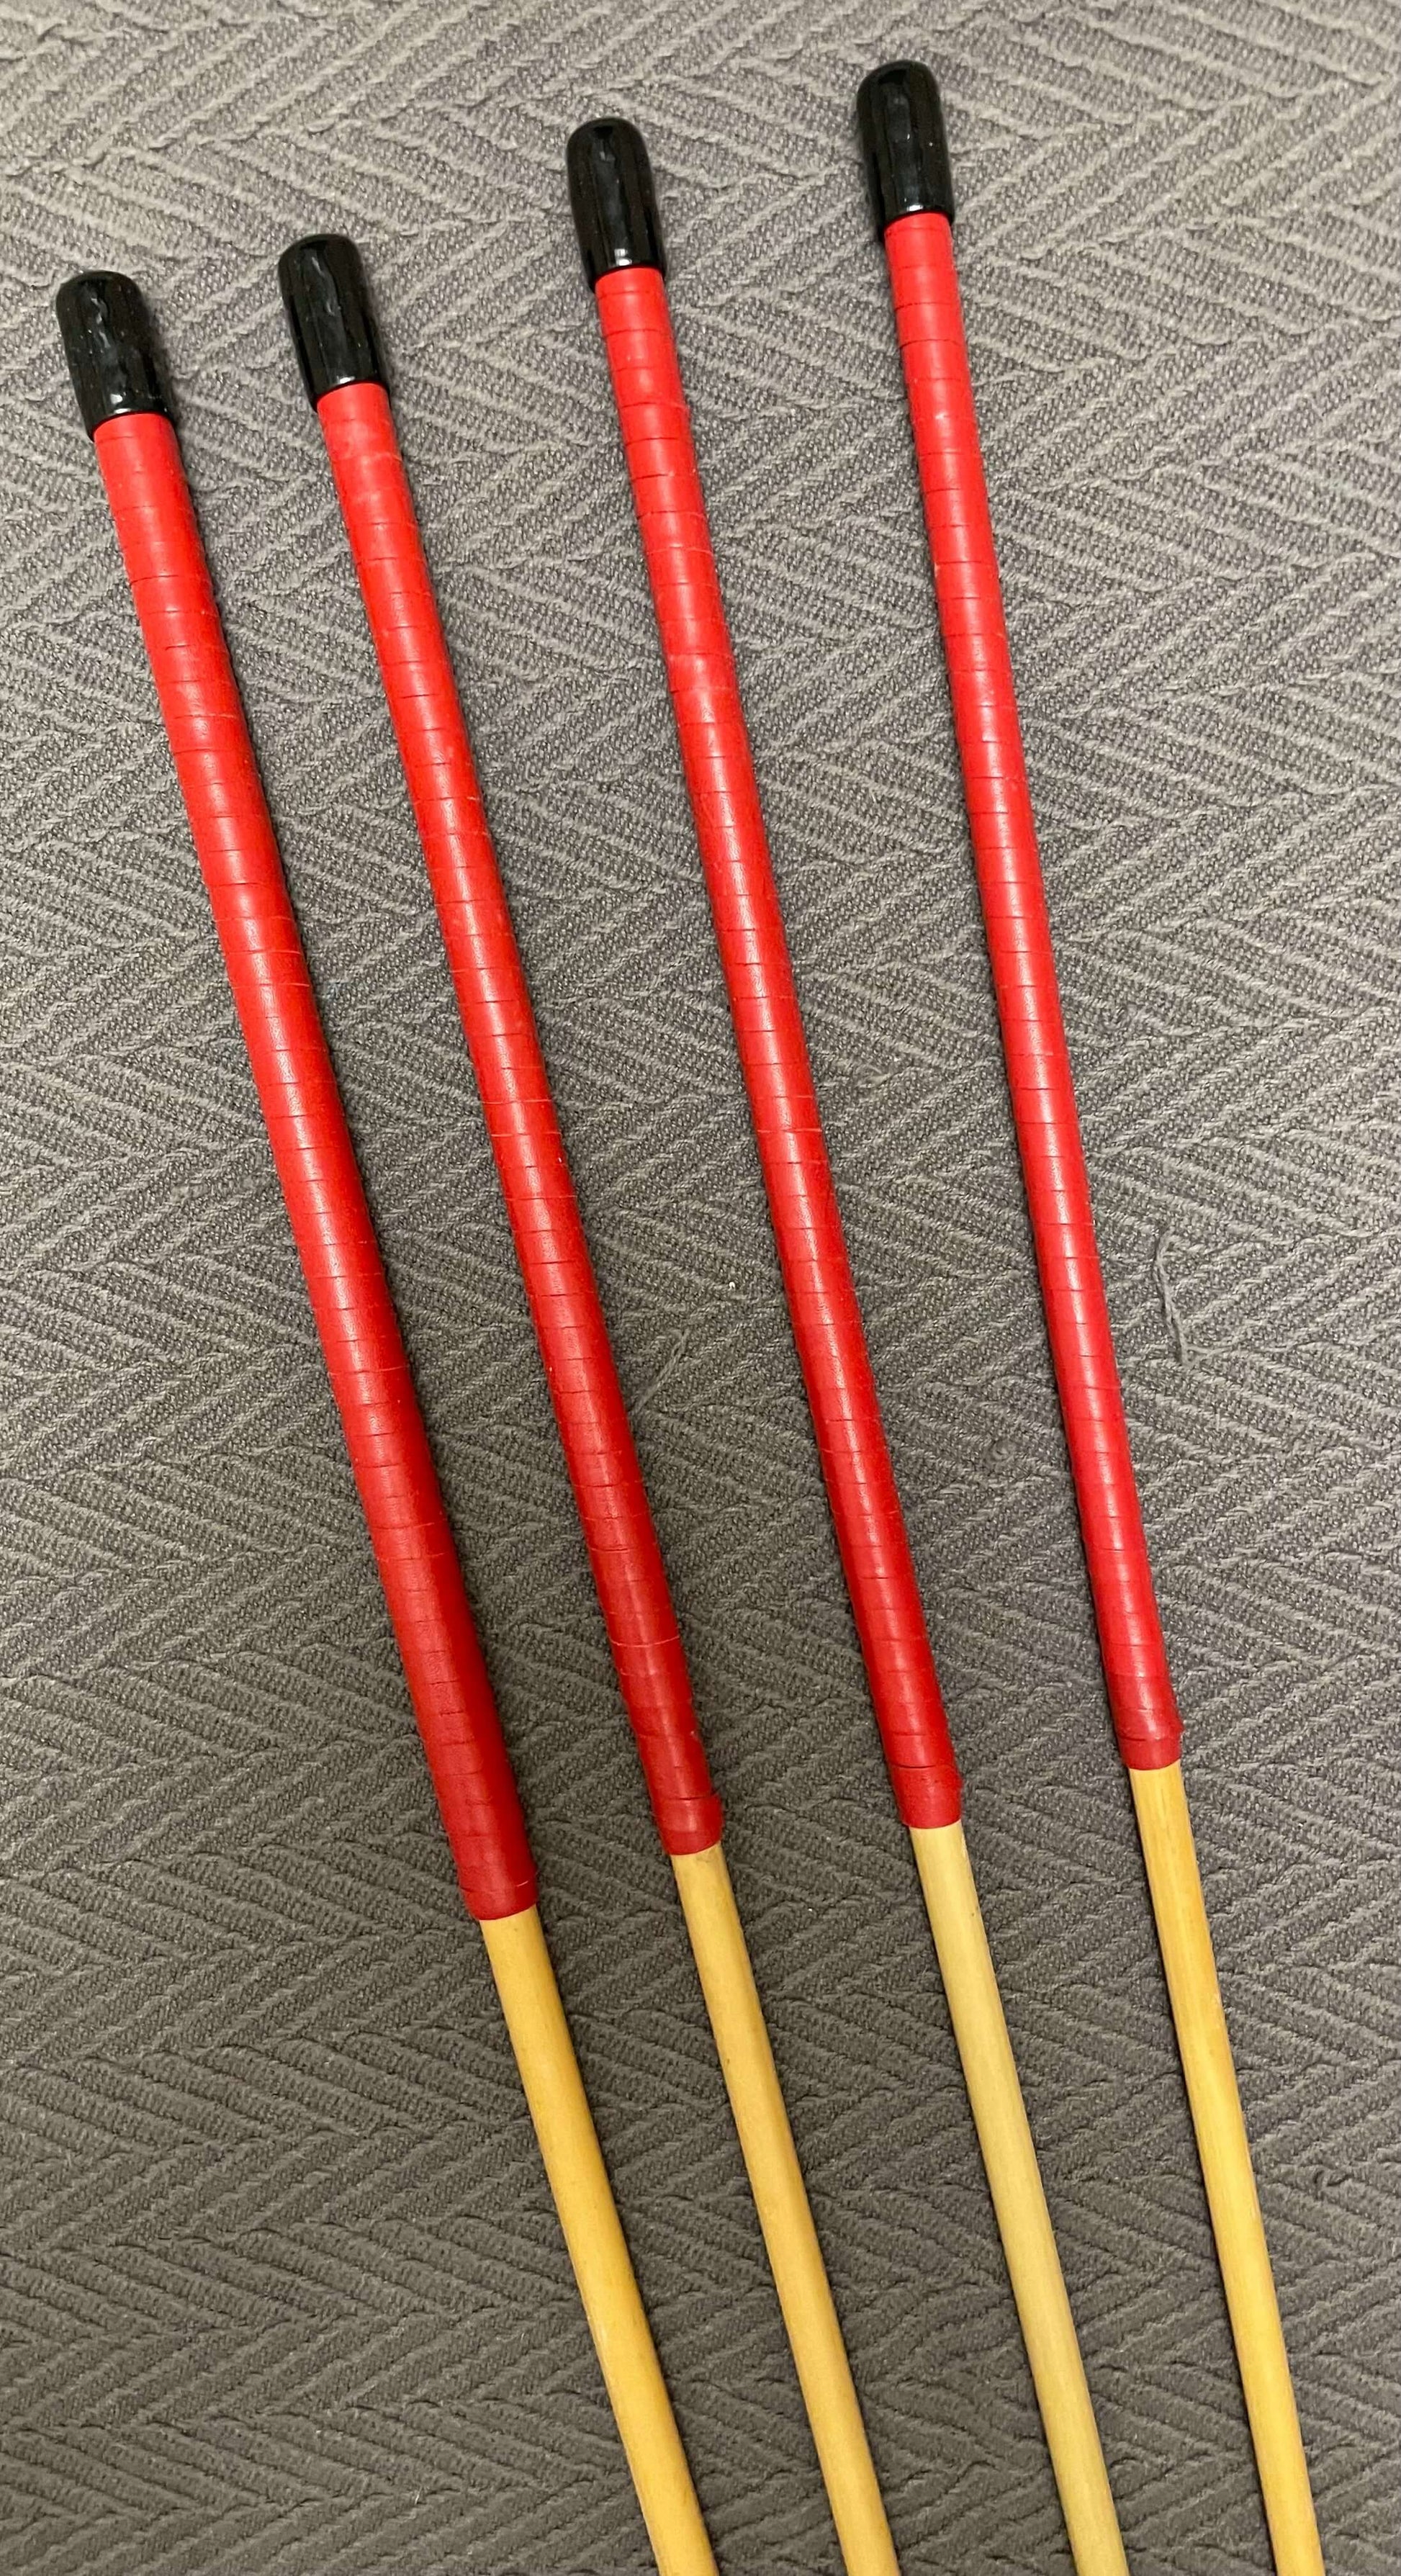 Dragon Cane Professional Set of 4 rattan canes / School Canes / BDSM Canes- 90 cms Length - Brandy or Red Kangaroo Leather Handles - Englishvice Canes